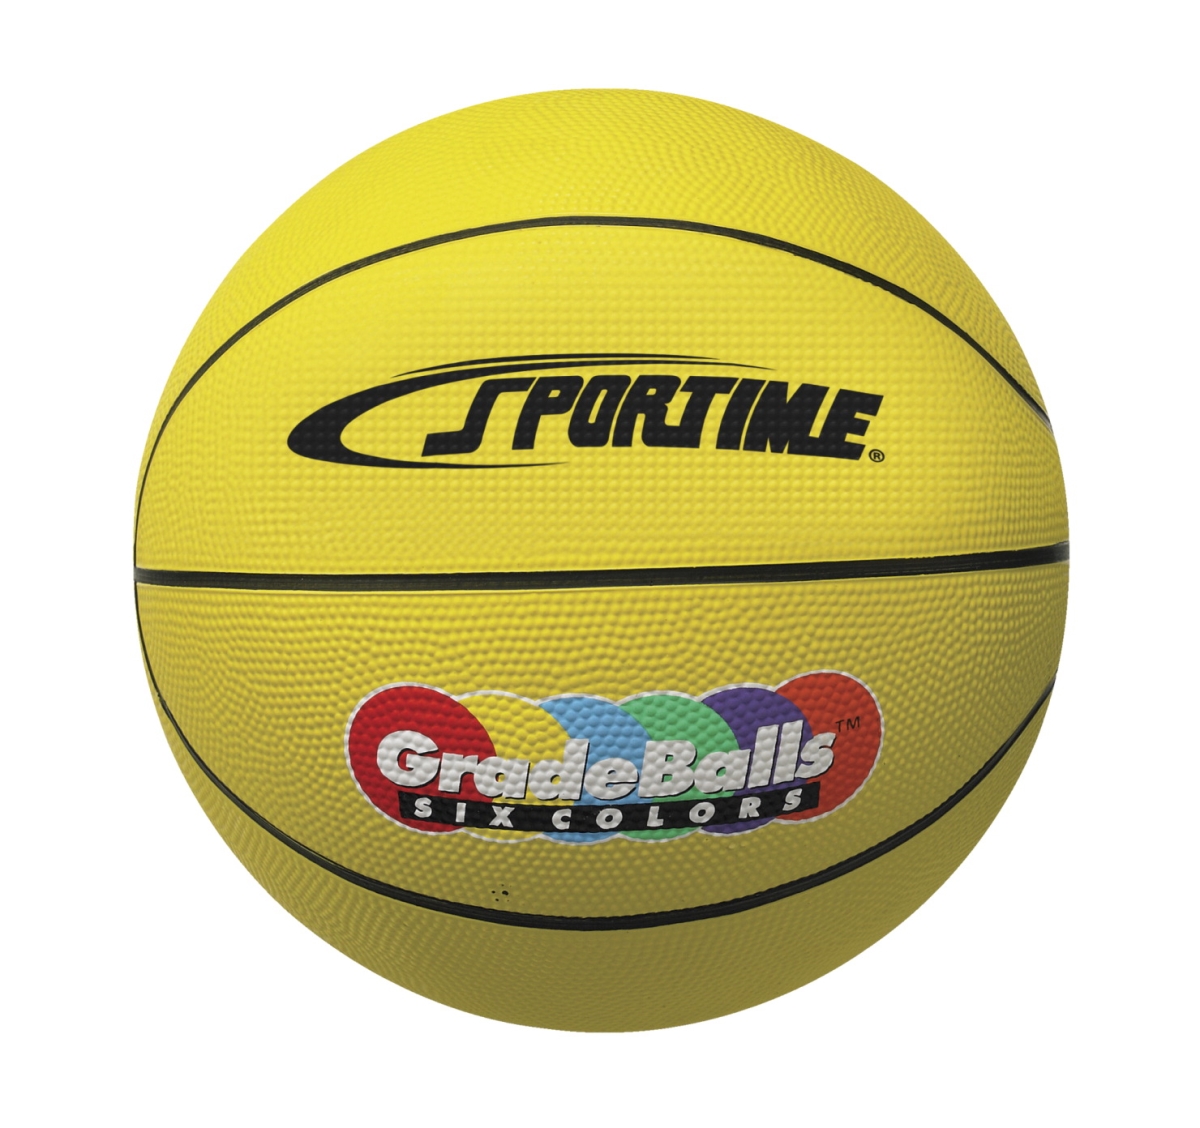 Picture of Sportime 1599261 27 in. Gradeball Rubber Junior Basketball, Yellow